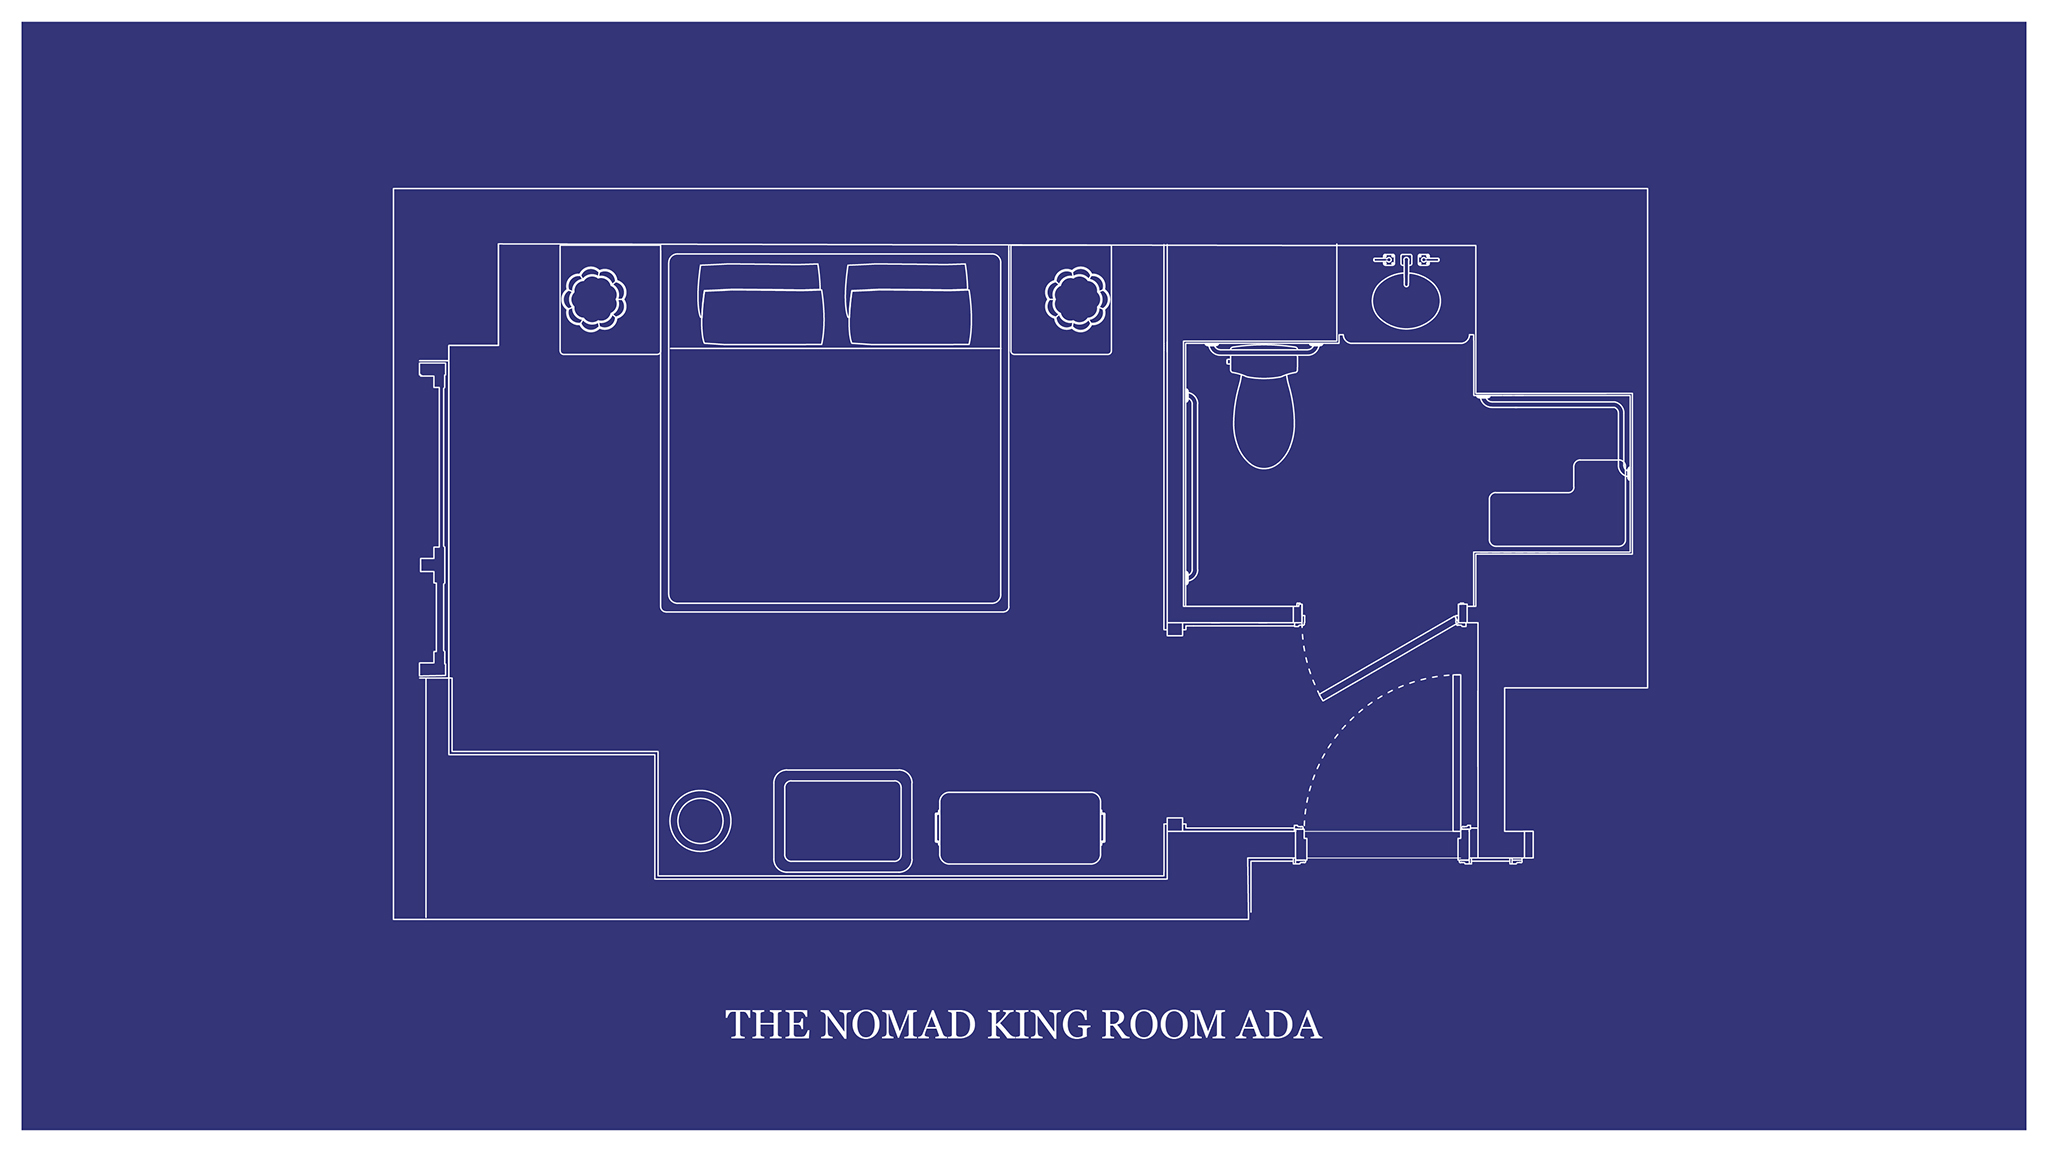 Blueprint map of "THE NOMAD KING ROOM ADA" rendered in intricate detail and design.